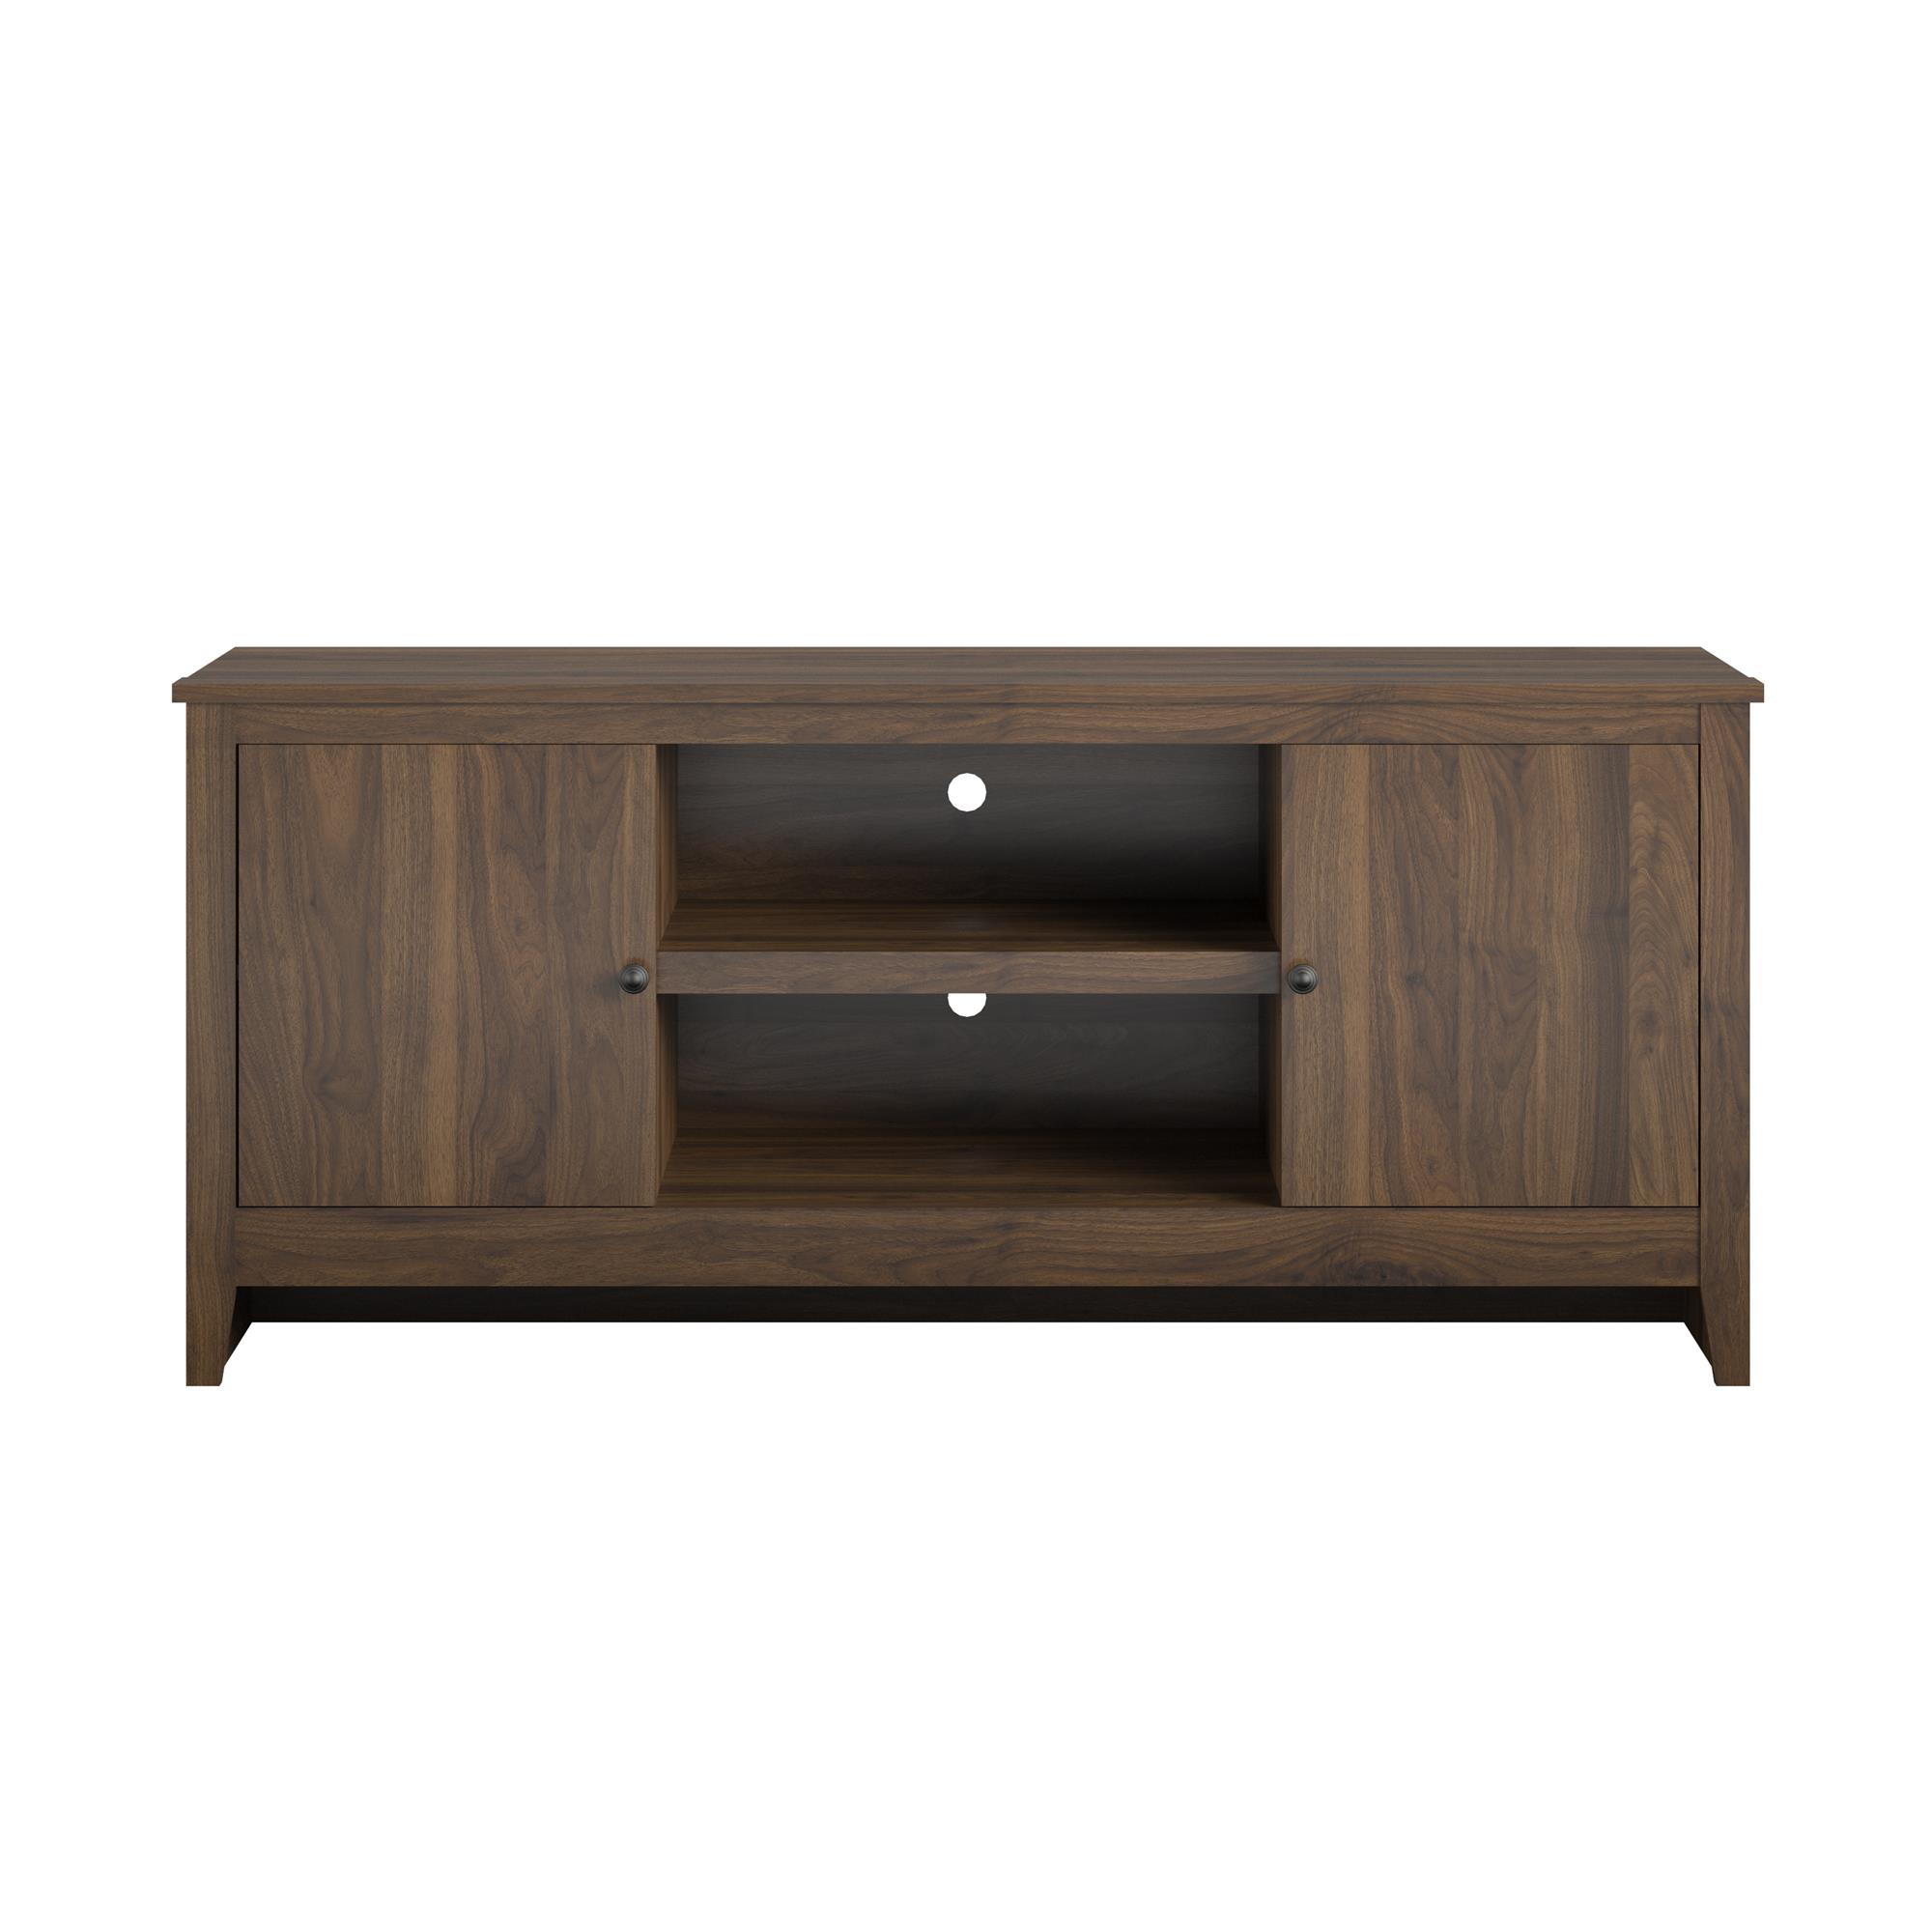 Mainstays TV Stand for TVs up to 65", Walnut - image 3 of 11